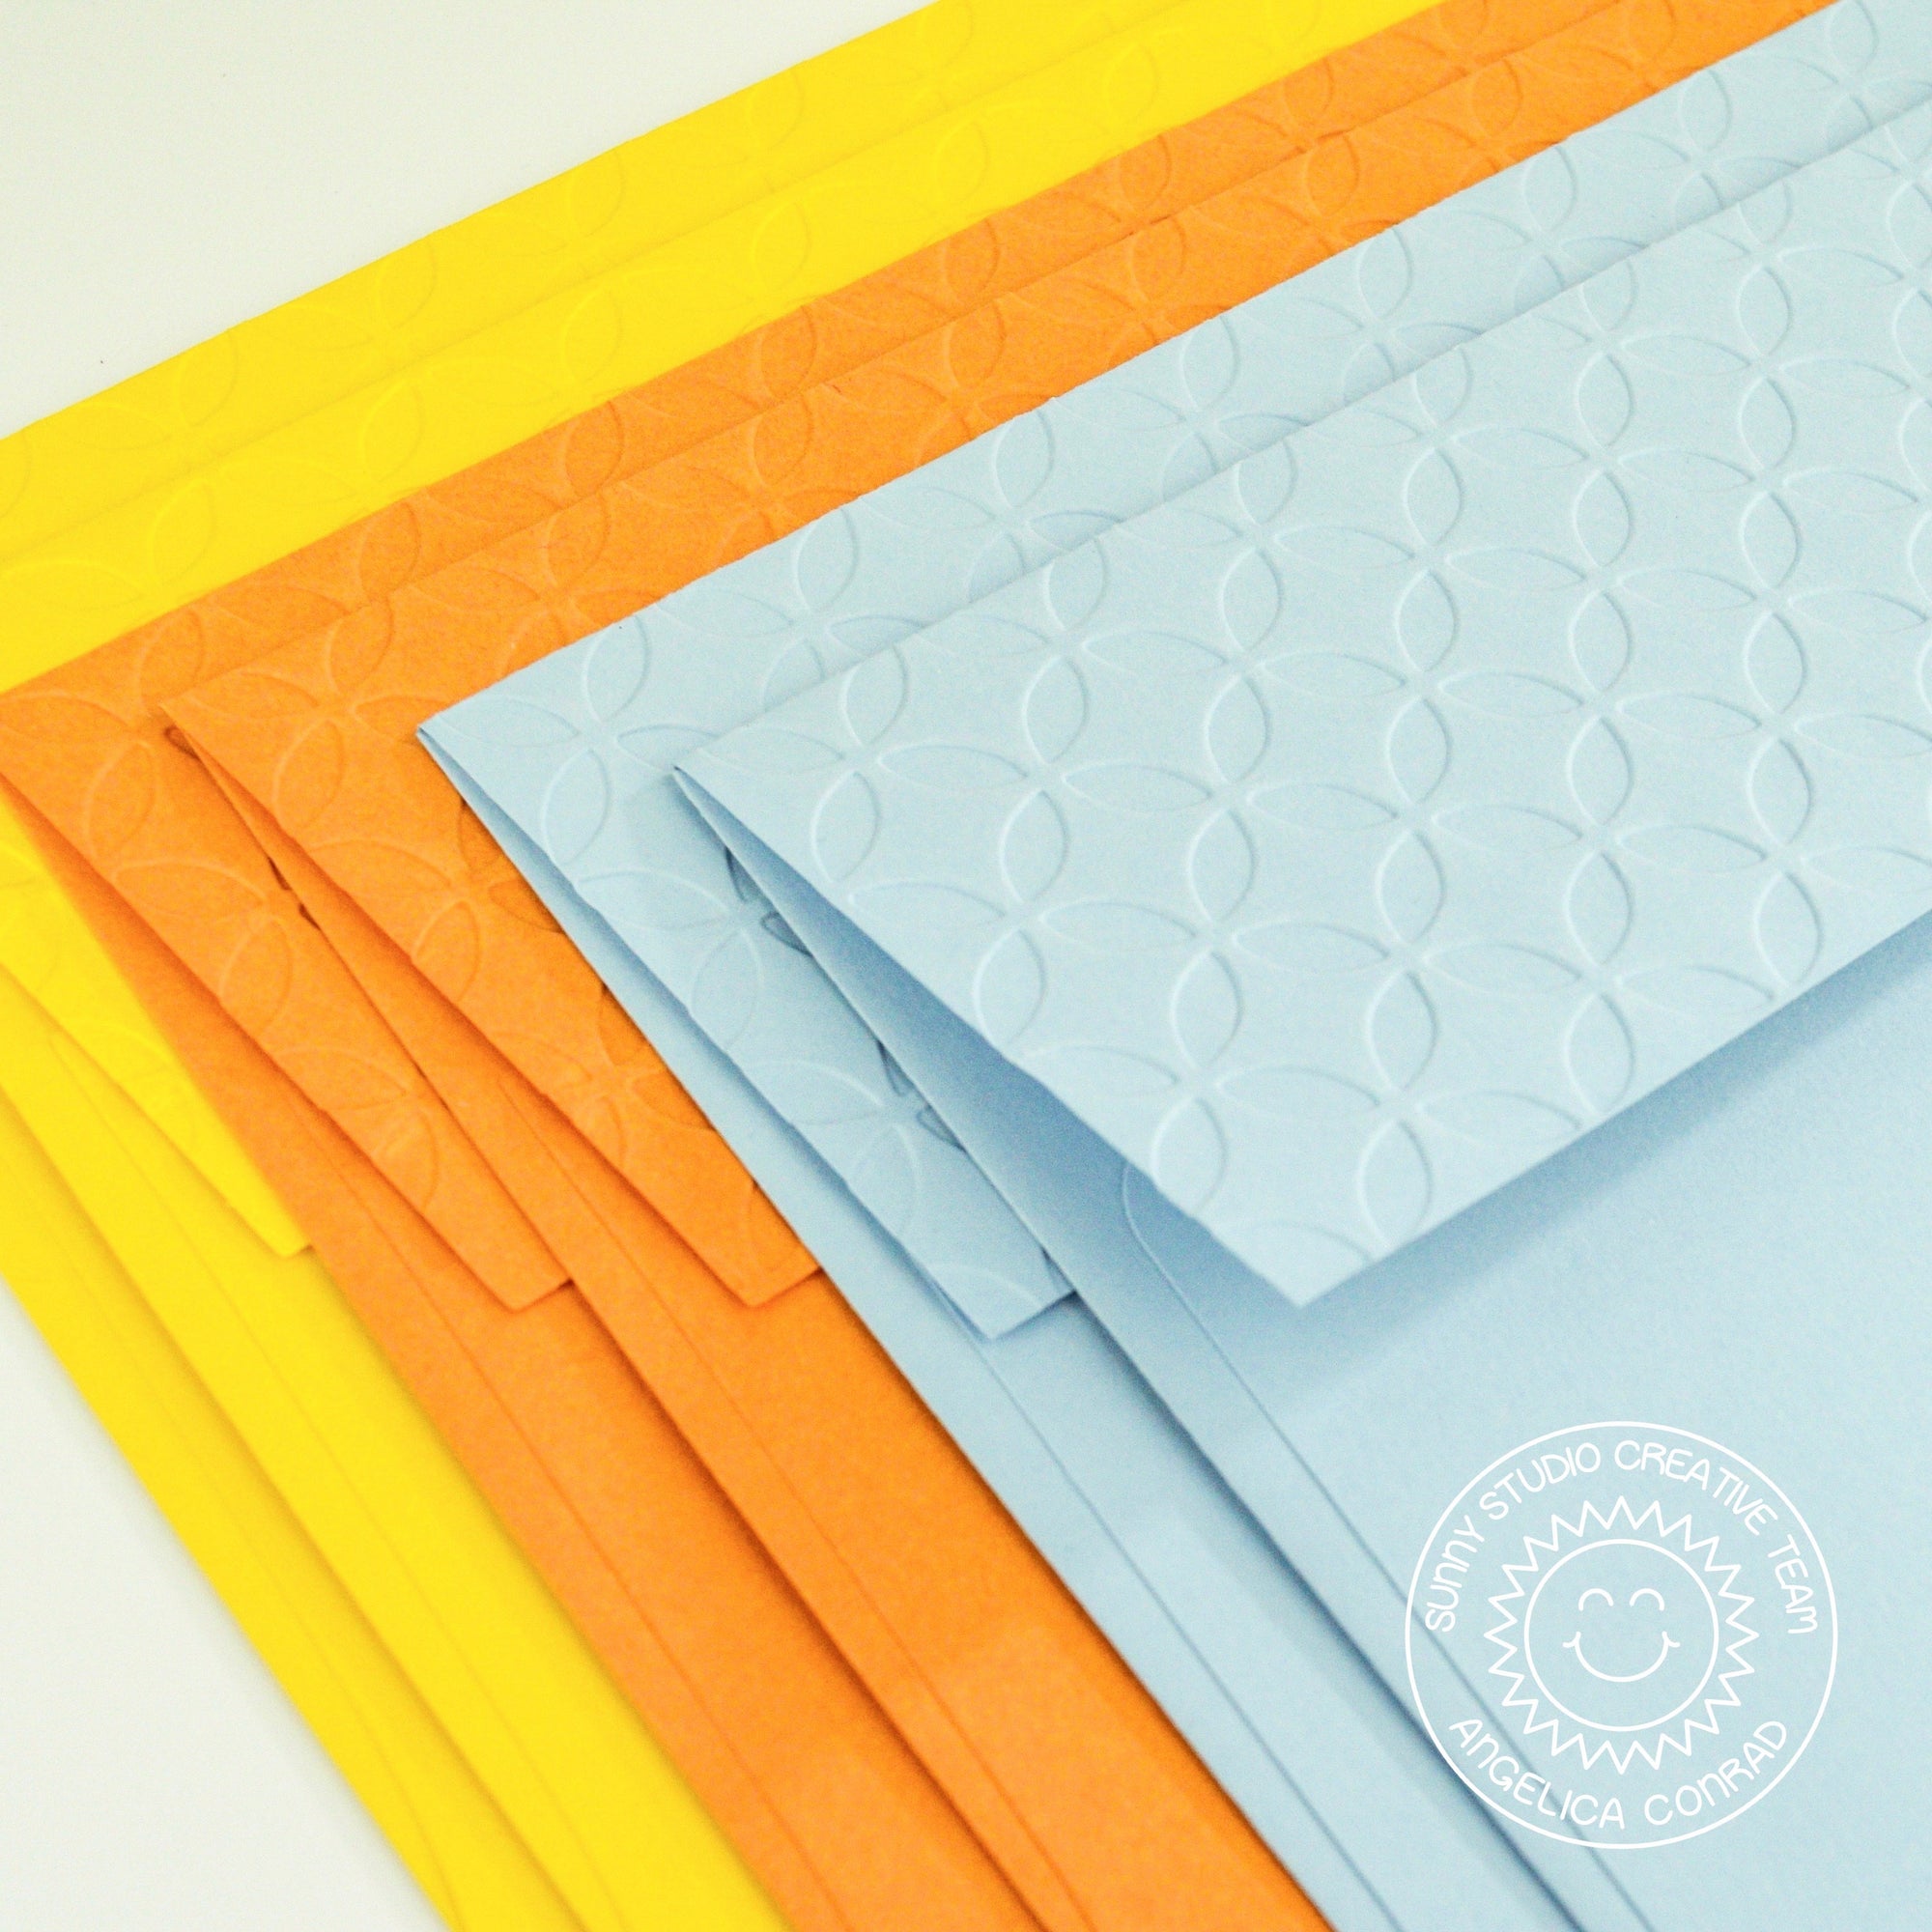 Sunny Studio Stamps Embossed Envelope Set by Angelica (using Moroccan Circles 6x6 Embossing Folder)